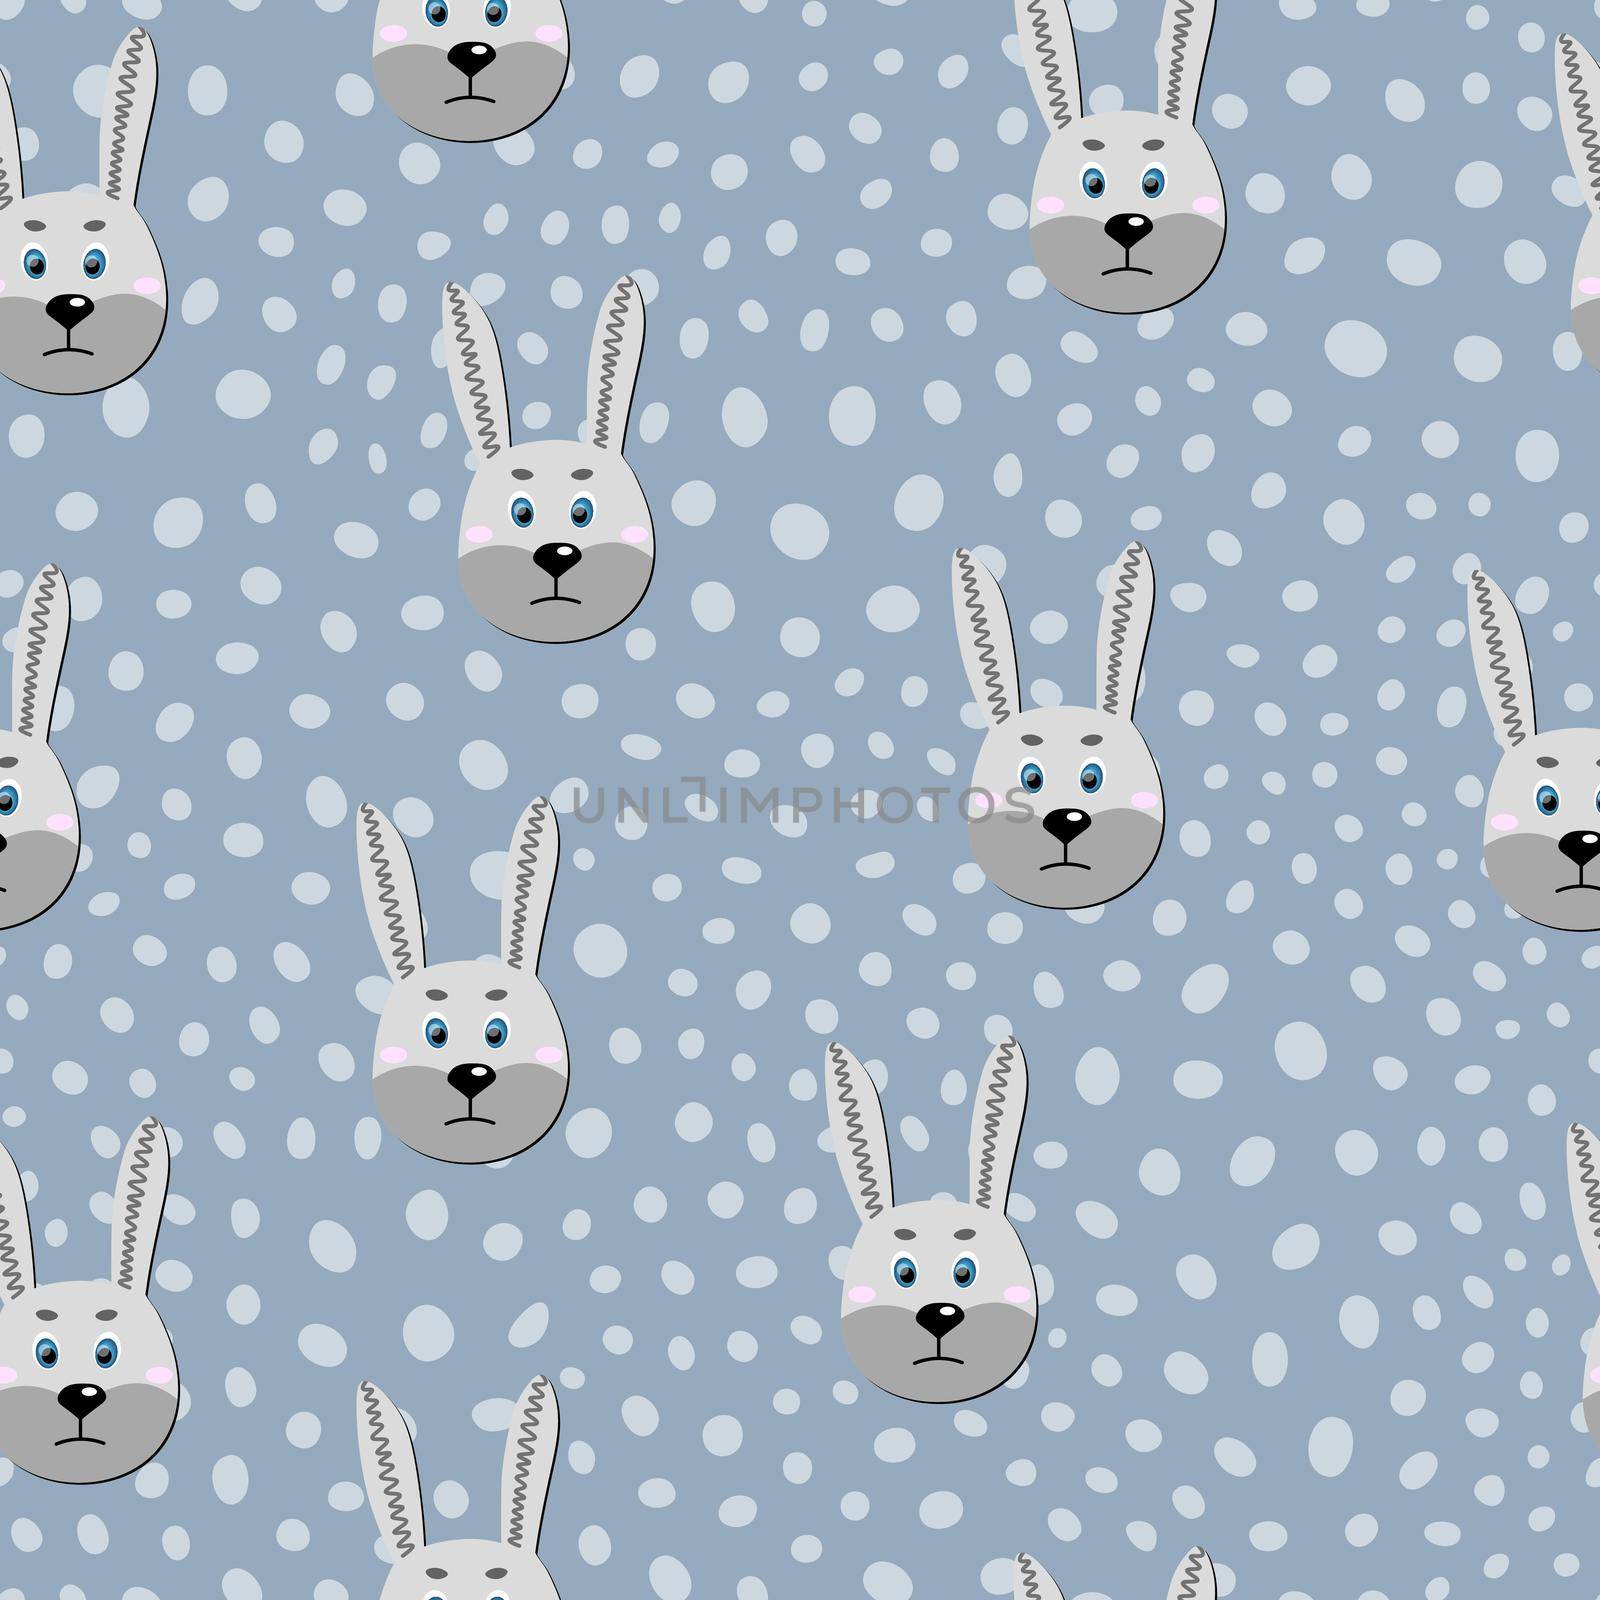 Vector flat animals colorful illustration for kids. Seamless pattern with cute hare face on blue polka dots background. Adorable cartoon character. Design for card, poster, fabric, textile. Rabbit. by allaku